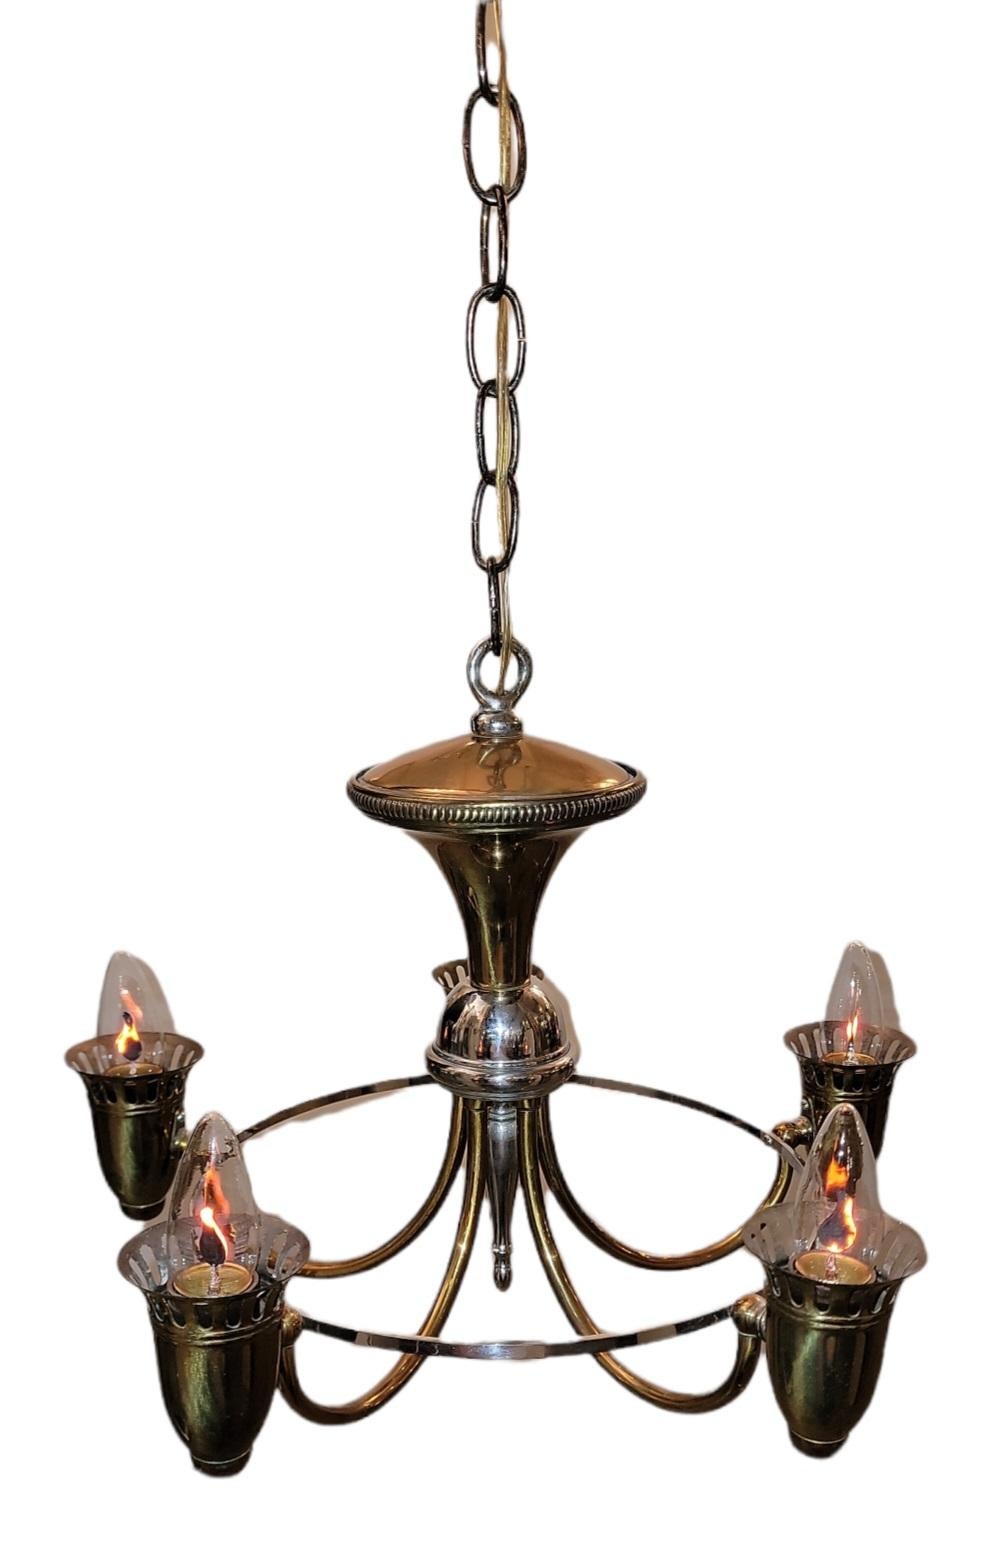 Italian brass five light chandelier with a retro look. the rounded look edges provide a sleek look while the lights add a subtle glare to the brass. Very nice and sleek look.

Measures: 13 high 16 diameter addition of chain is an extra 16 inches.